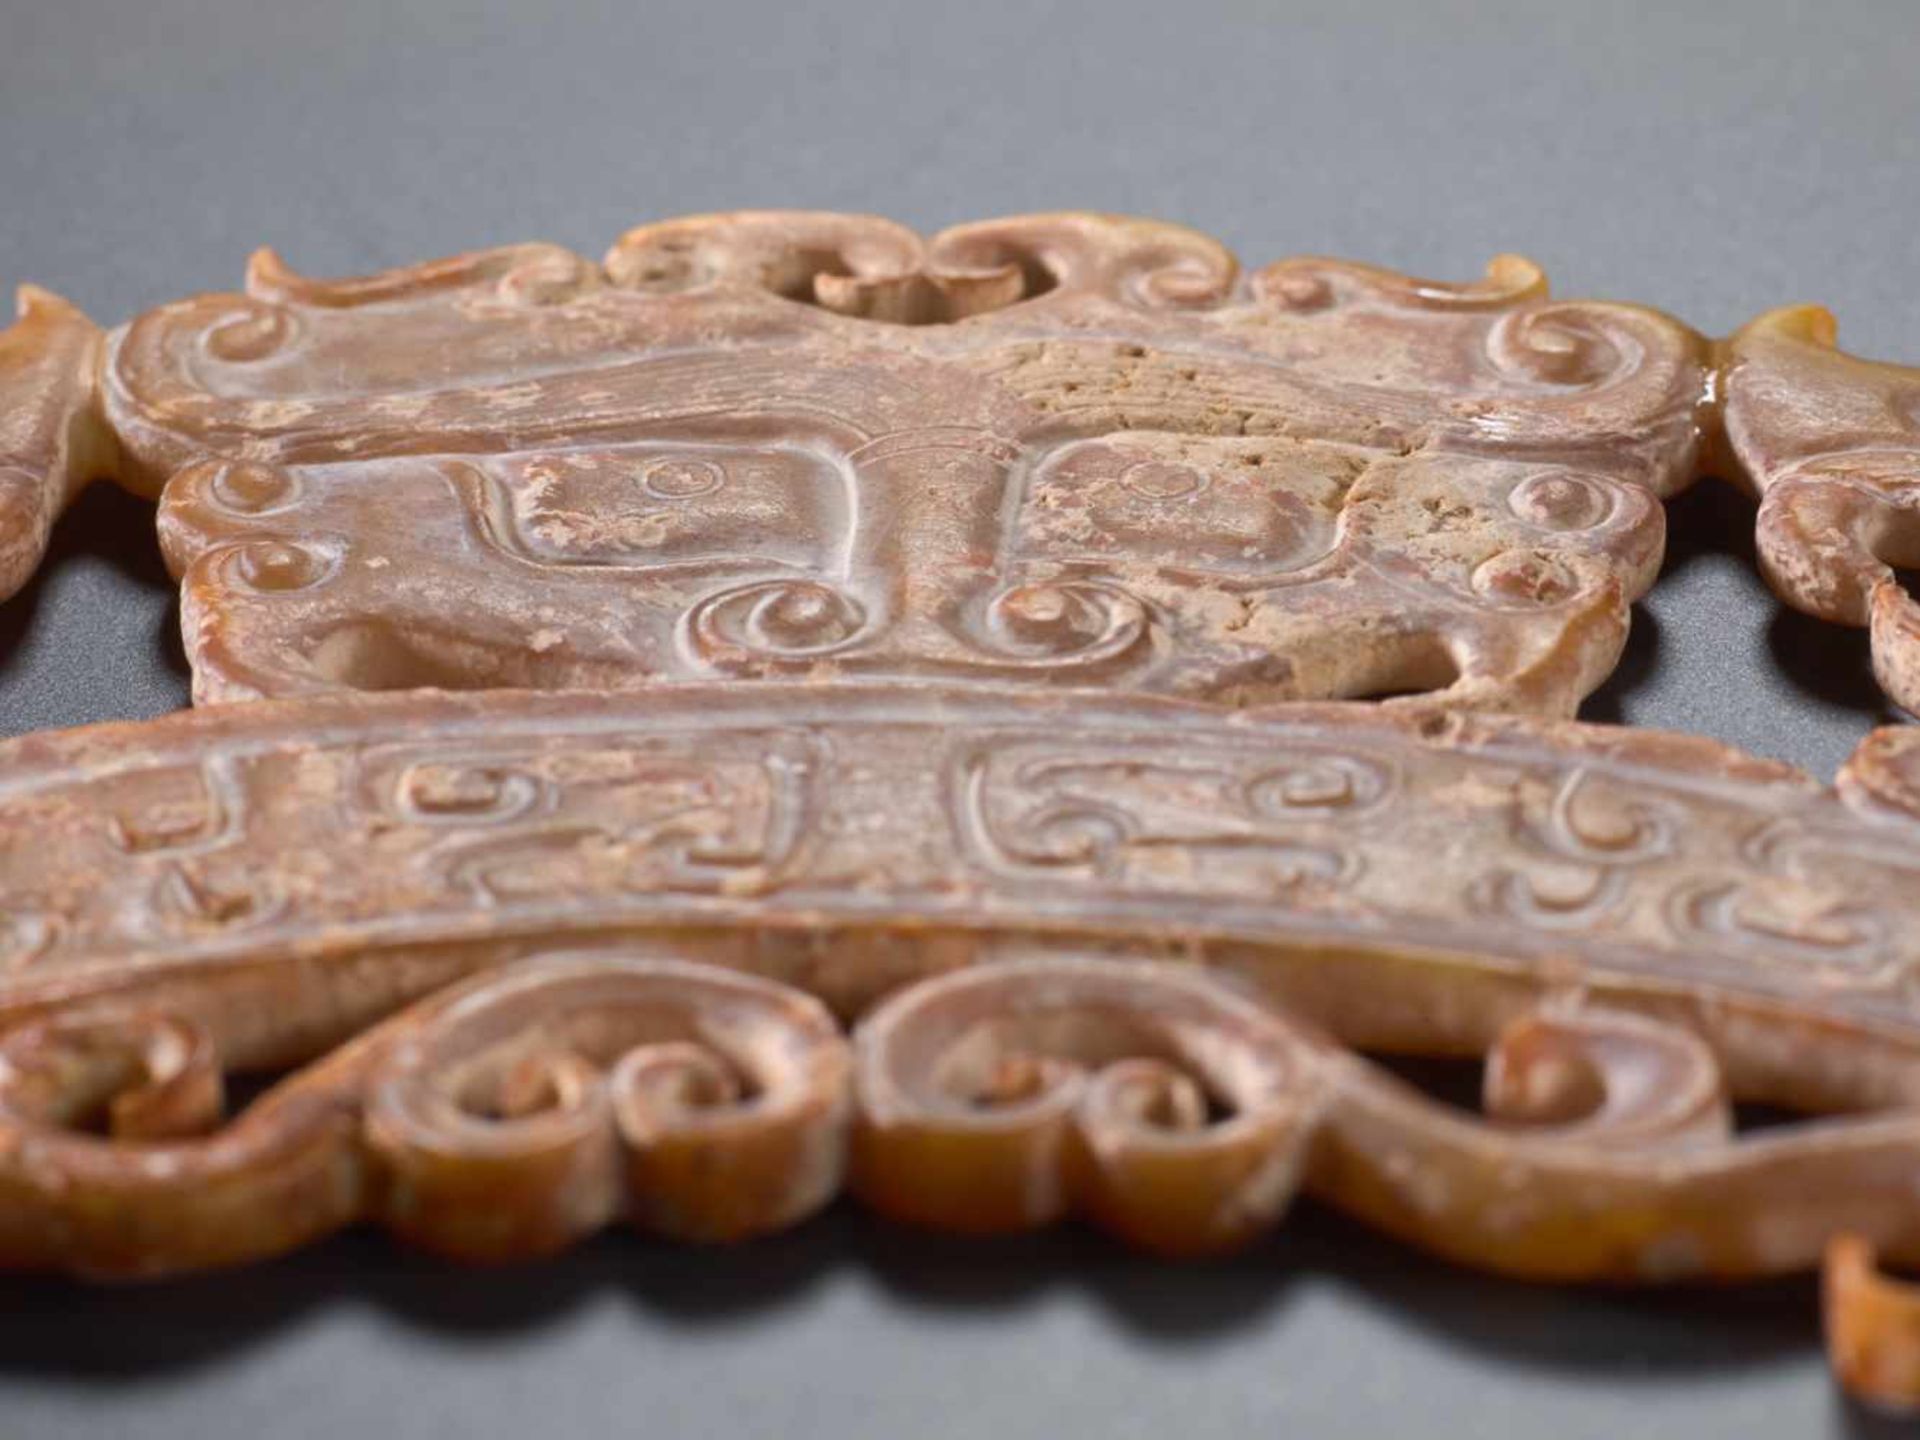 AN IMPRESSIVE ARCHED ORNAMENT DECORATED IN OPENWORK WITH DRAGONS AND A TAOTIE MASK Jade. China, Late - Image 4 of 4